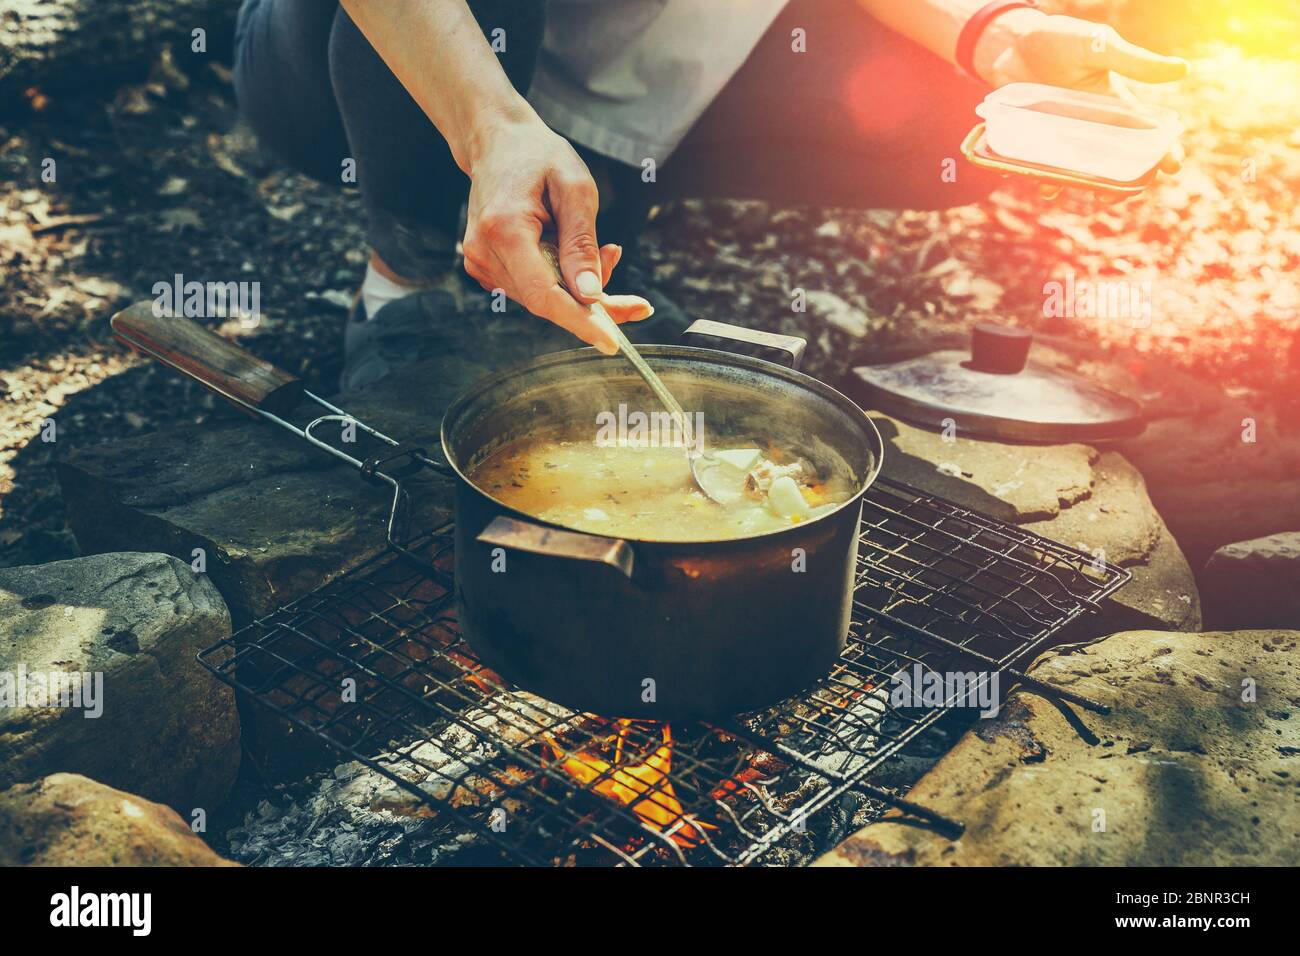 Unrecognizable woman tourist cooking on campfire in forest. Concept Tourism Camping Survival Wildlife Stock Photo